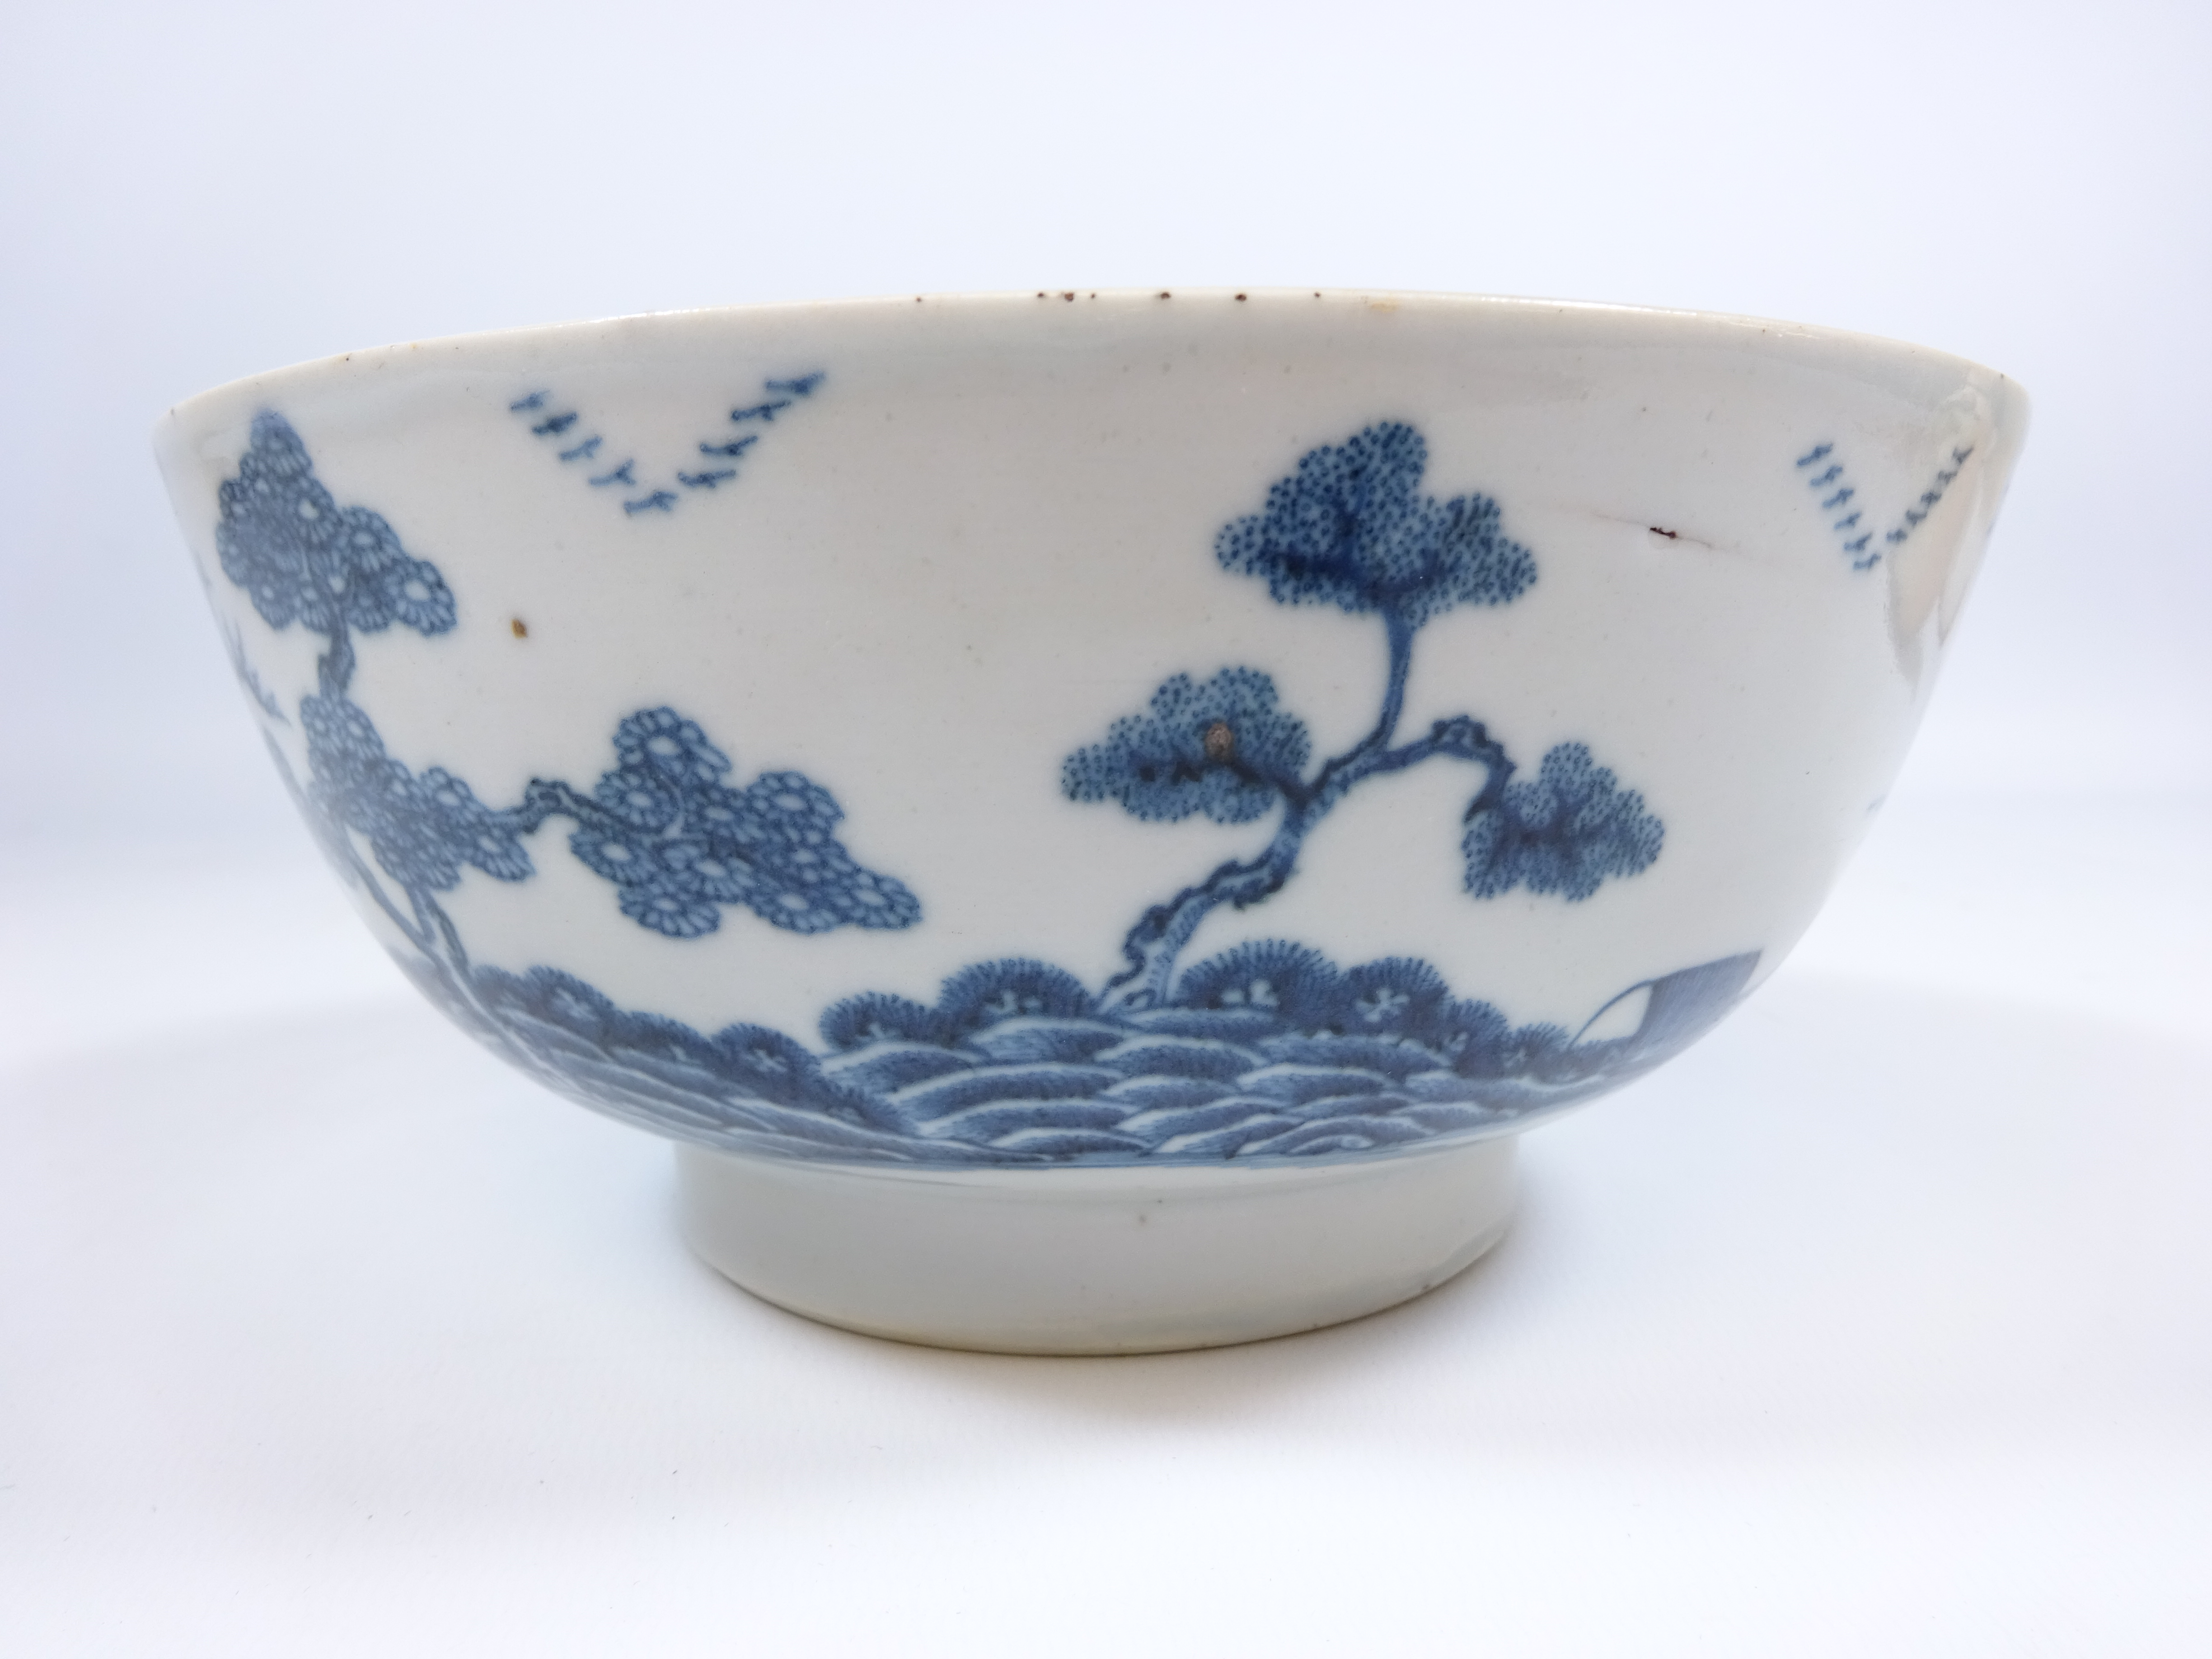 18th/ 19th Century Chinese blue and white Export porcelain bowl decorated with island villages, - Image 2 of 3